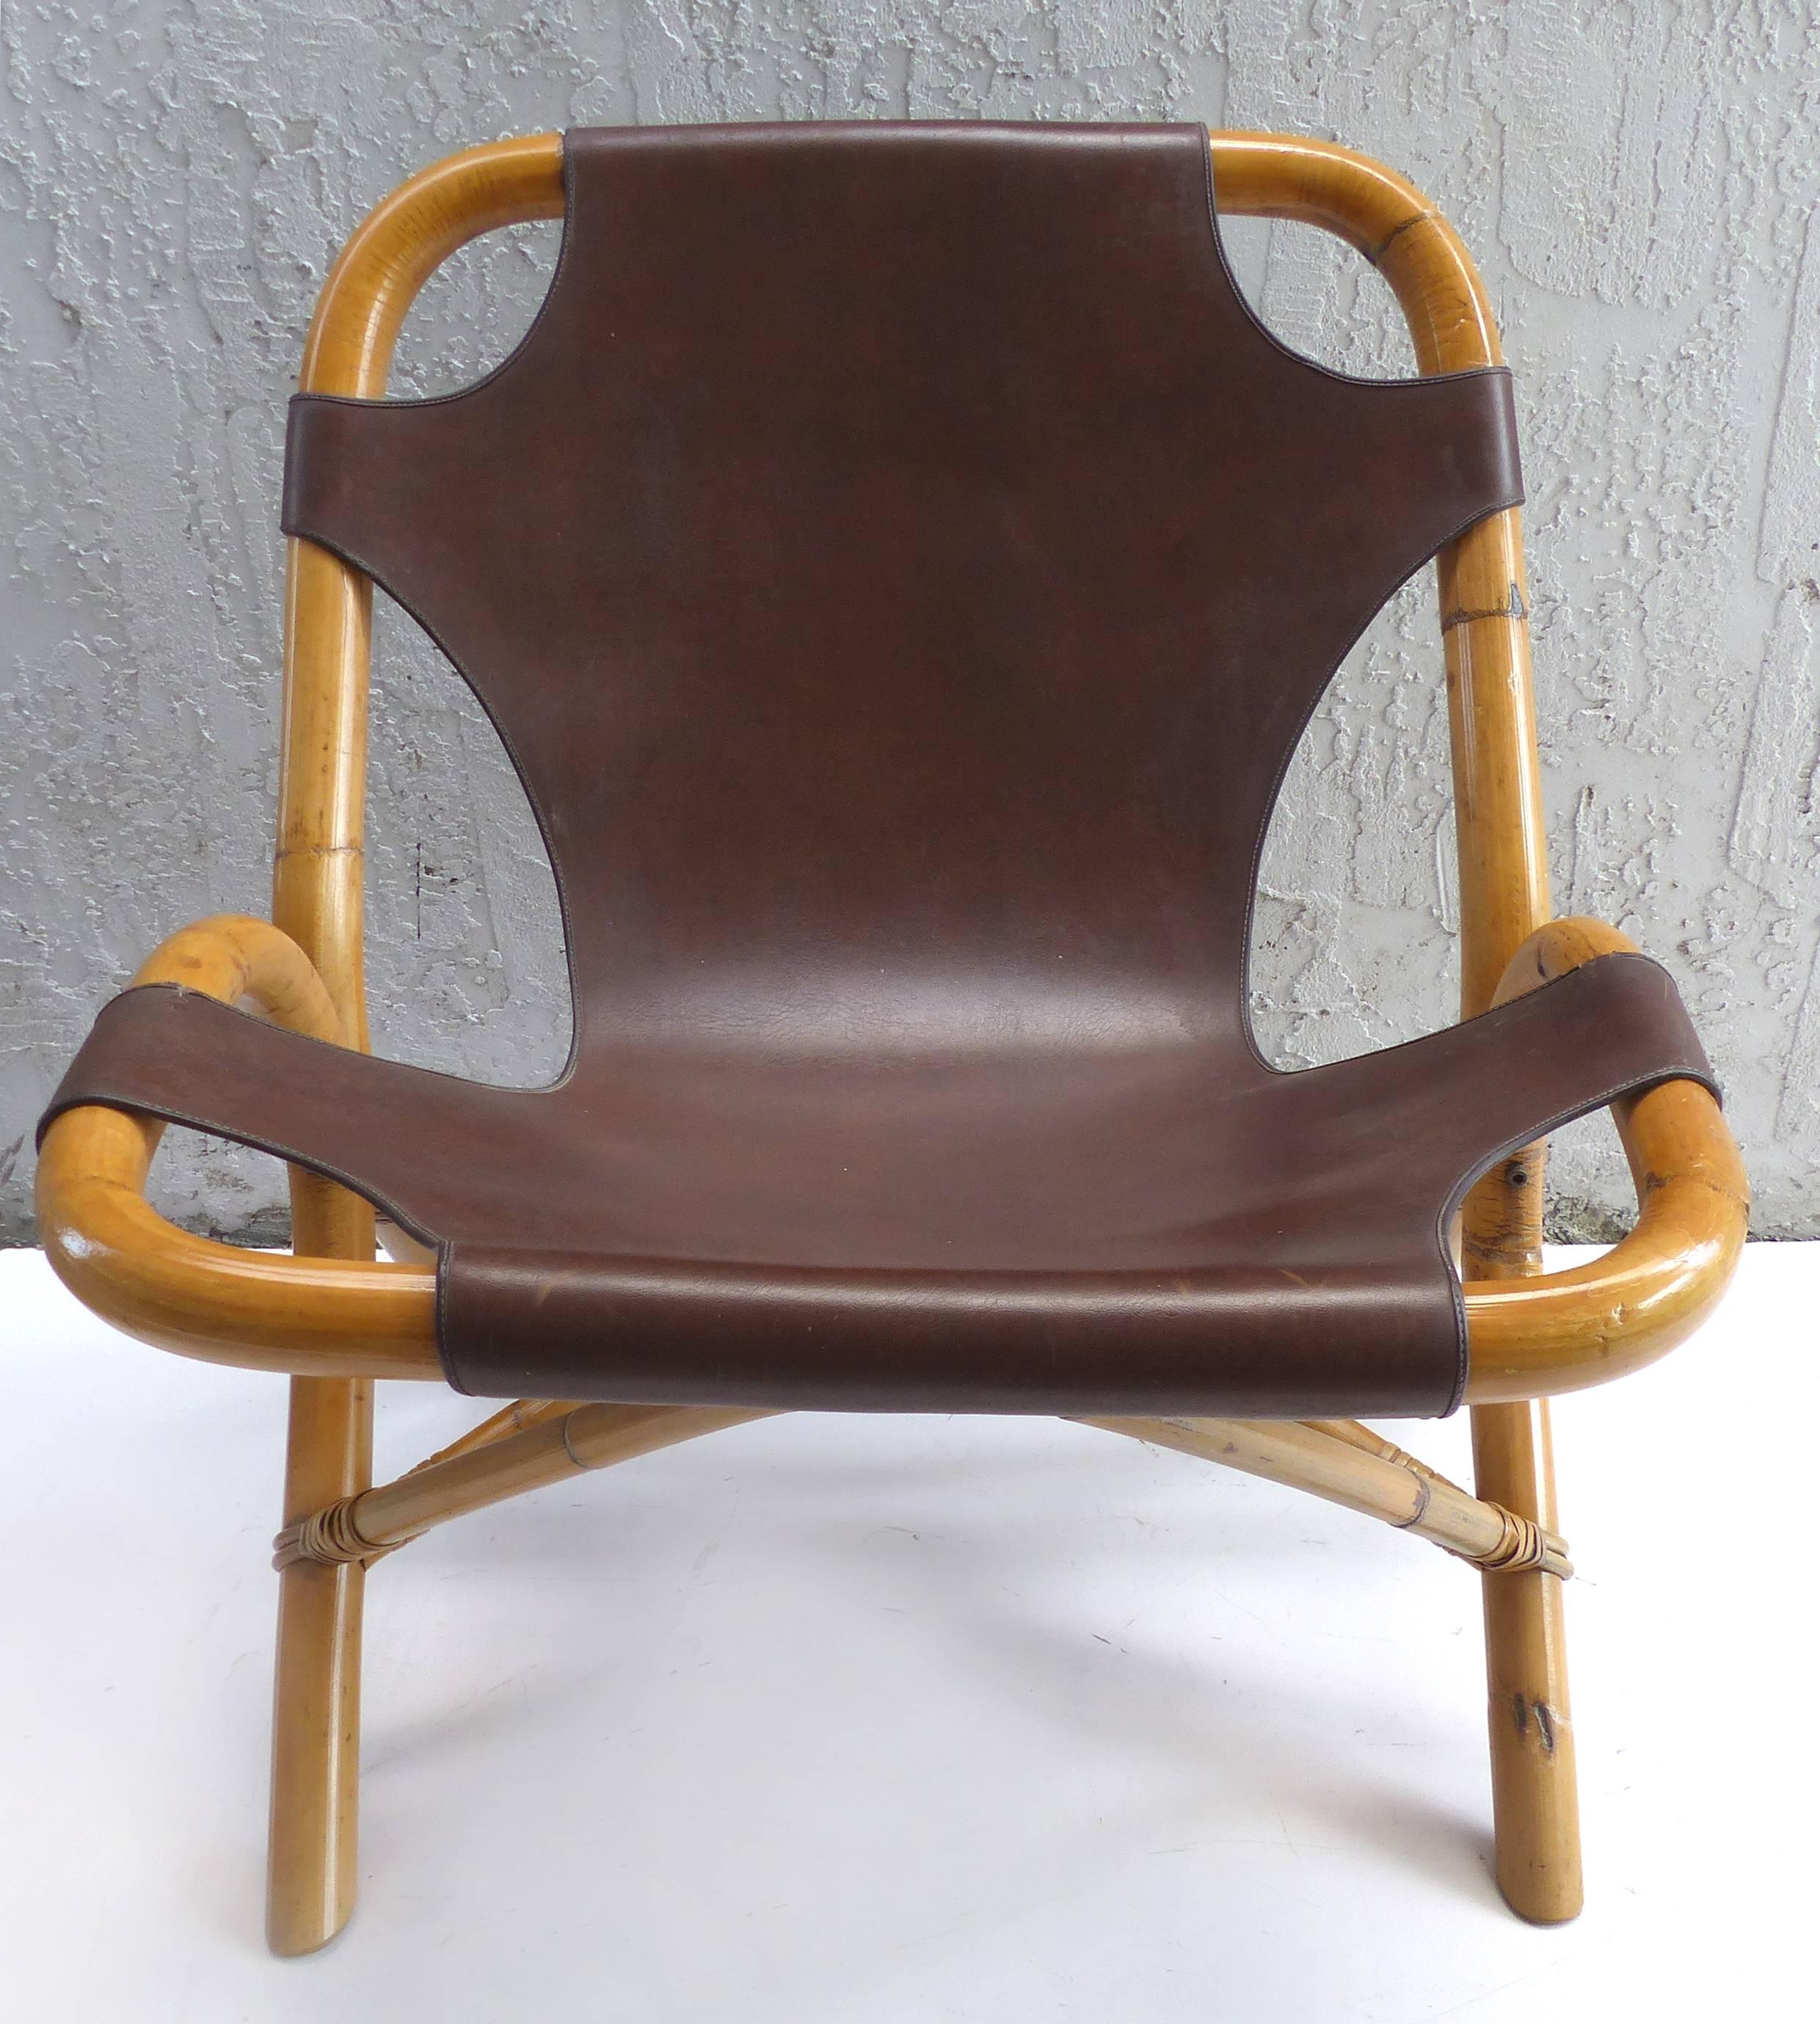 Offered for sale is a pair of Italian 1950s rattan and leather chairs by Pierantonio Bonacina. The chairs are in fine examples of Italian modern design and are in very nice condition. The have leather seats with brass studs which sling across